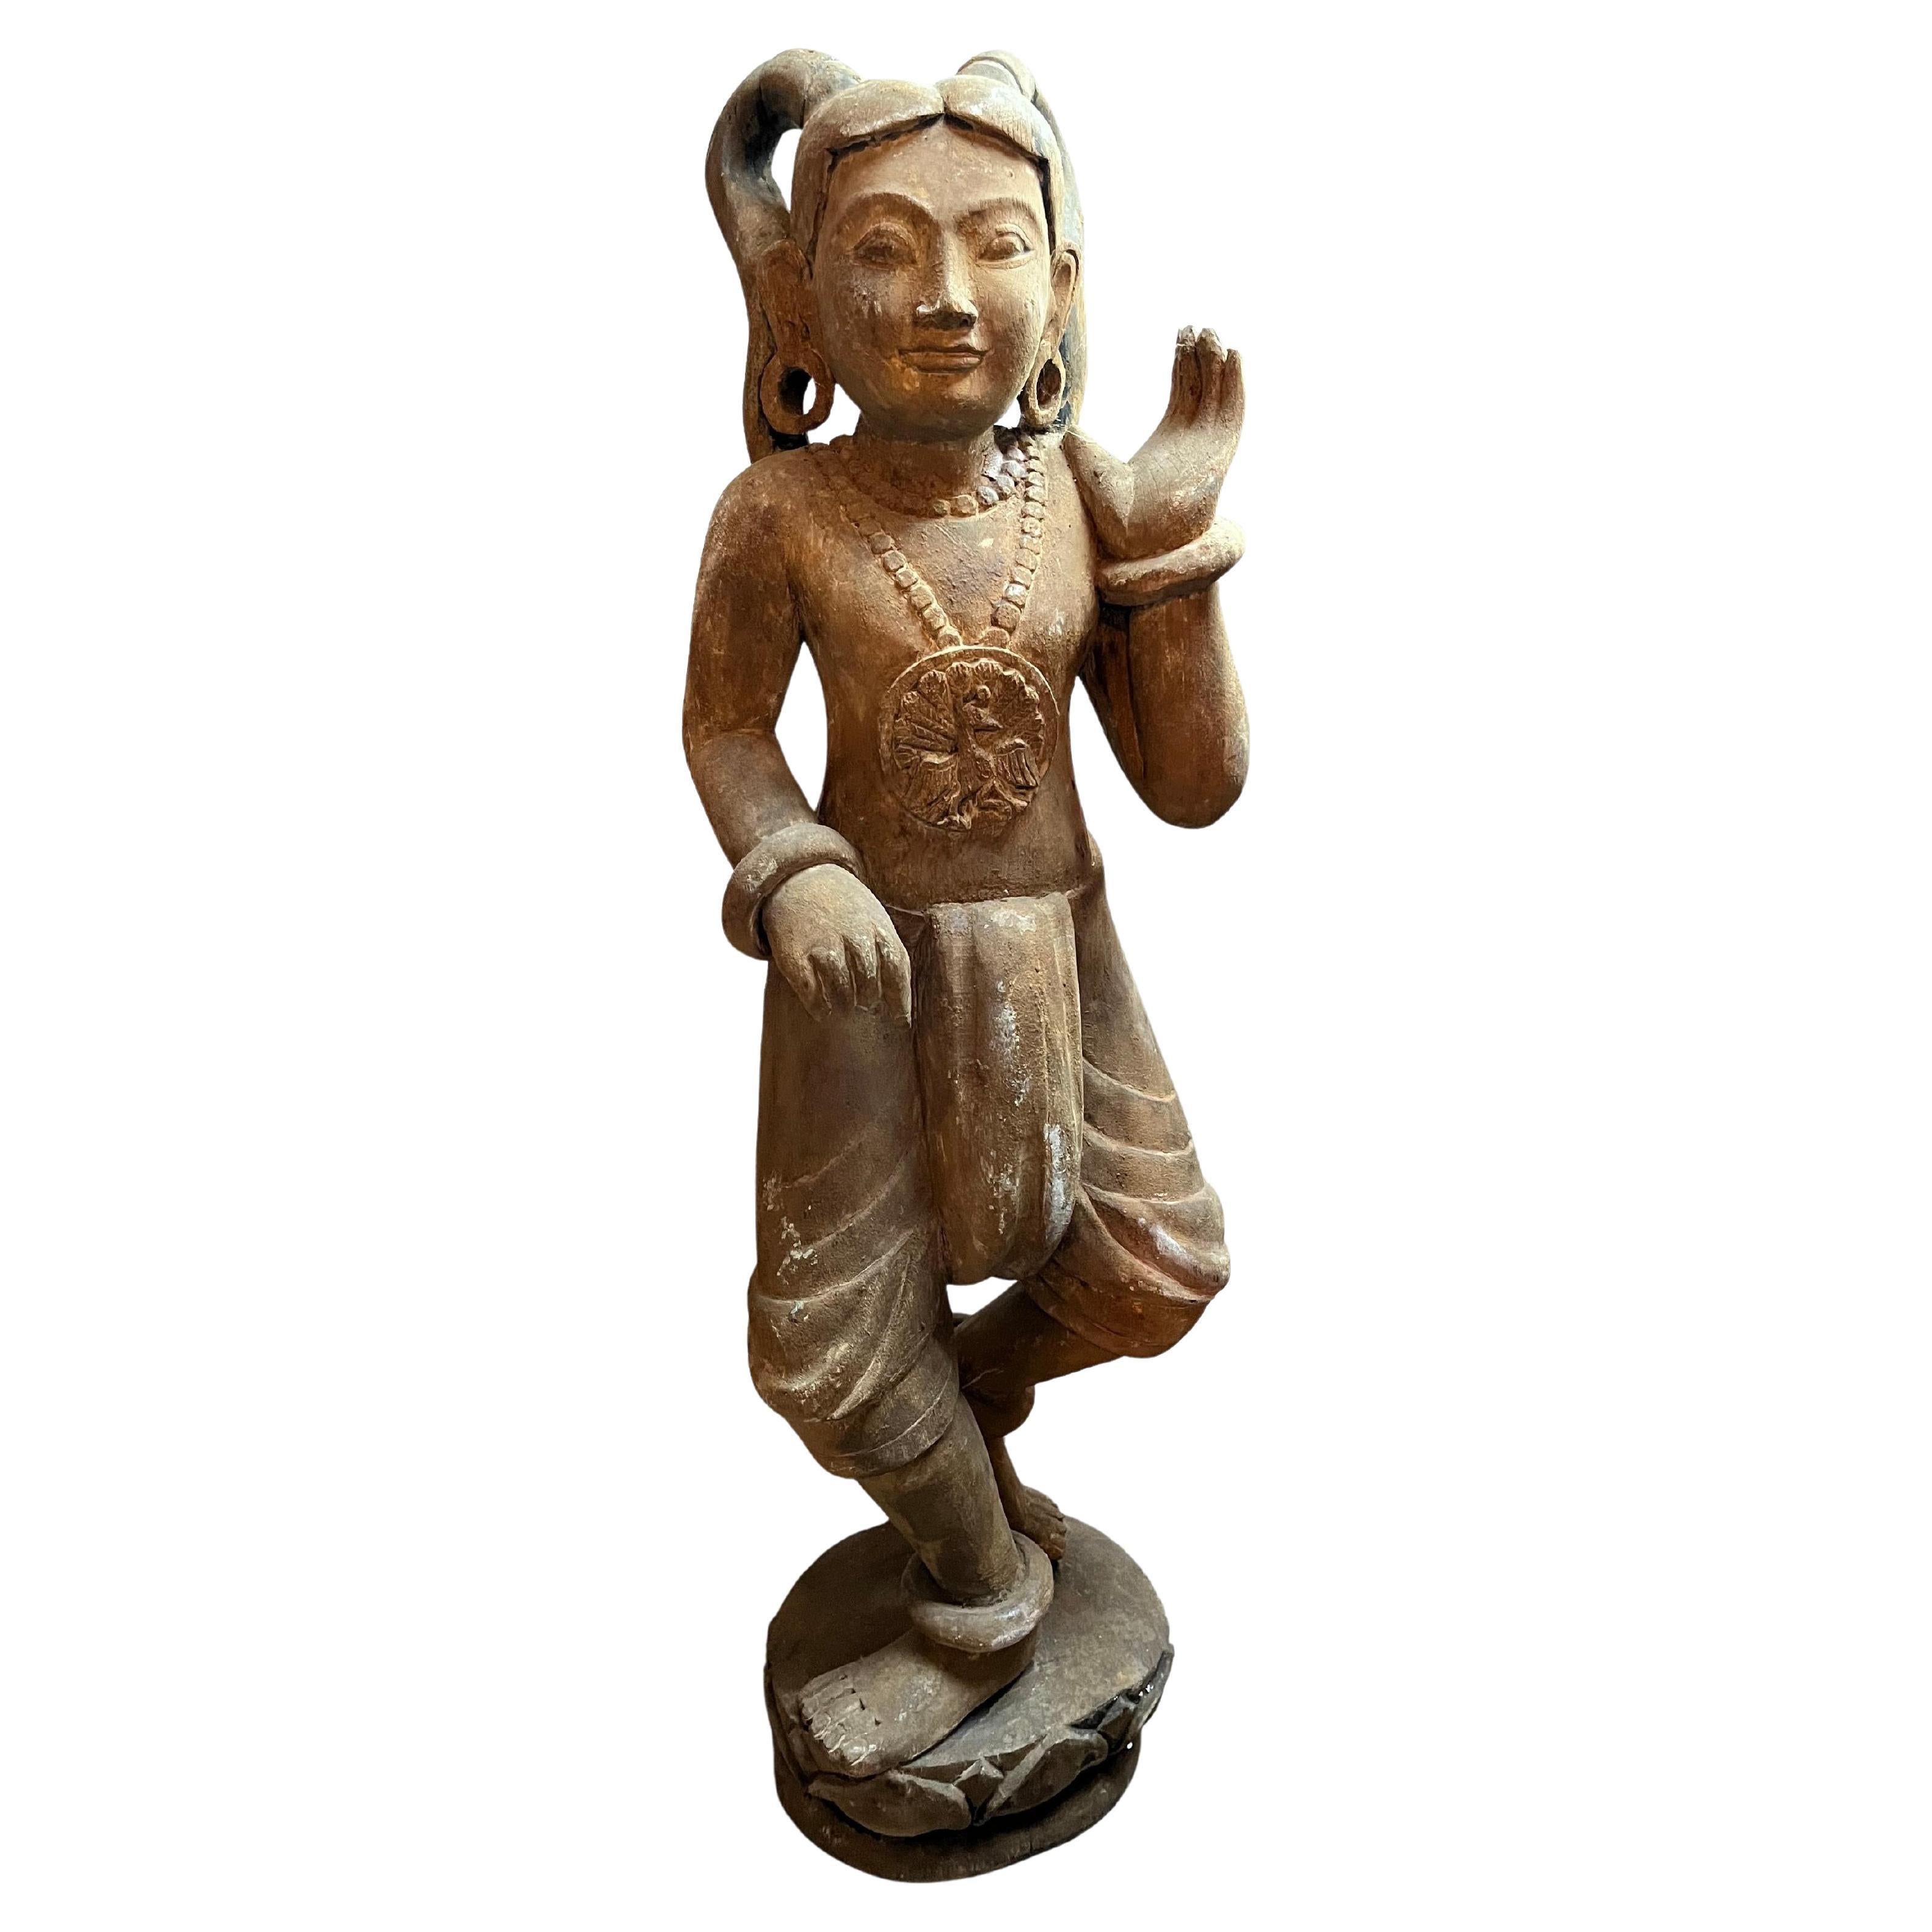 Balinese Carved Wood Statue of a Female Dancer